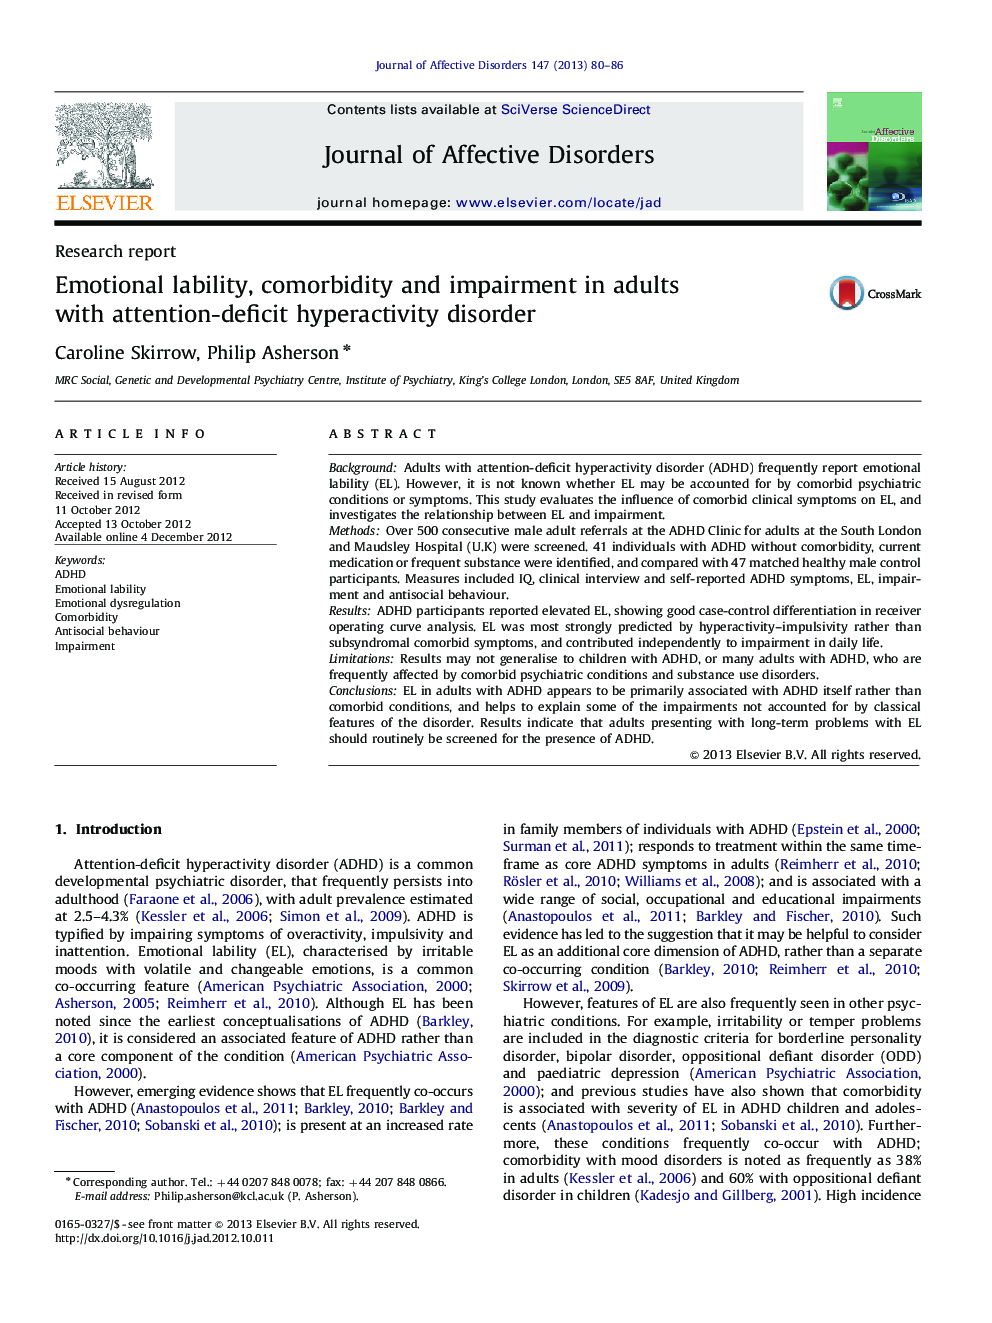 Emotional lability, comorbidity and impairment in adults with attention-deficit hyperactivity disorder